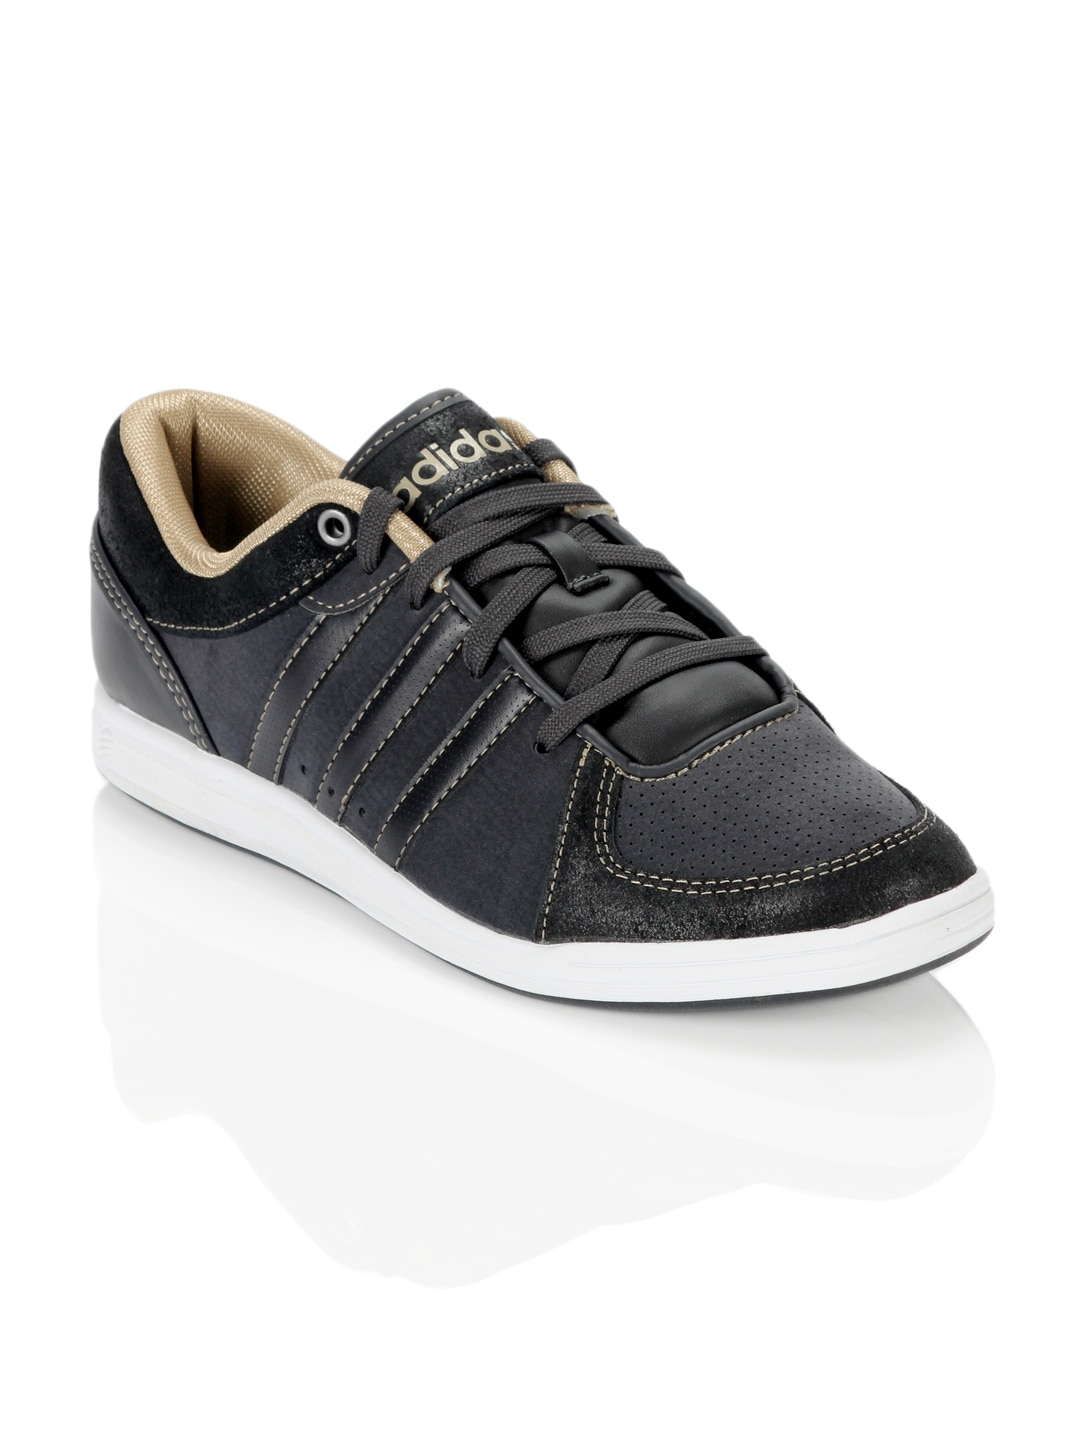 ADIDAS Neo Unisex Court Sequence Black Shoes